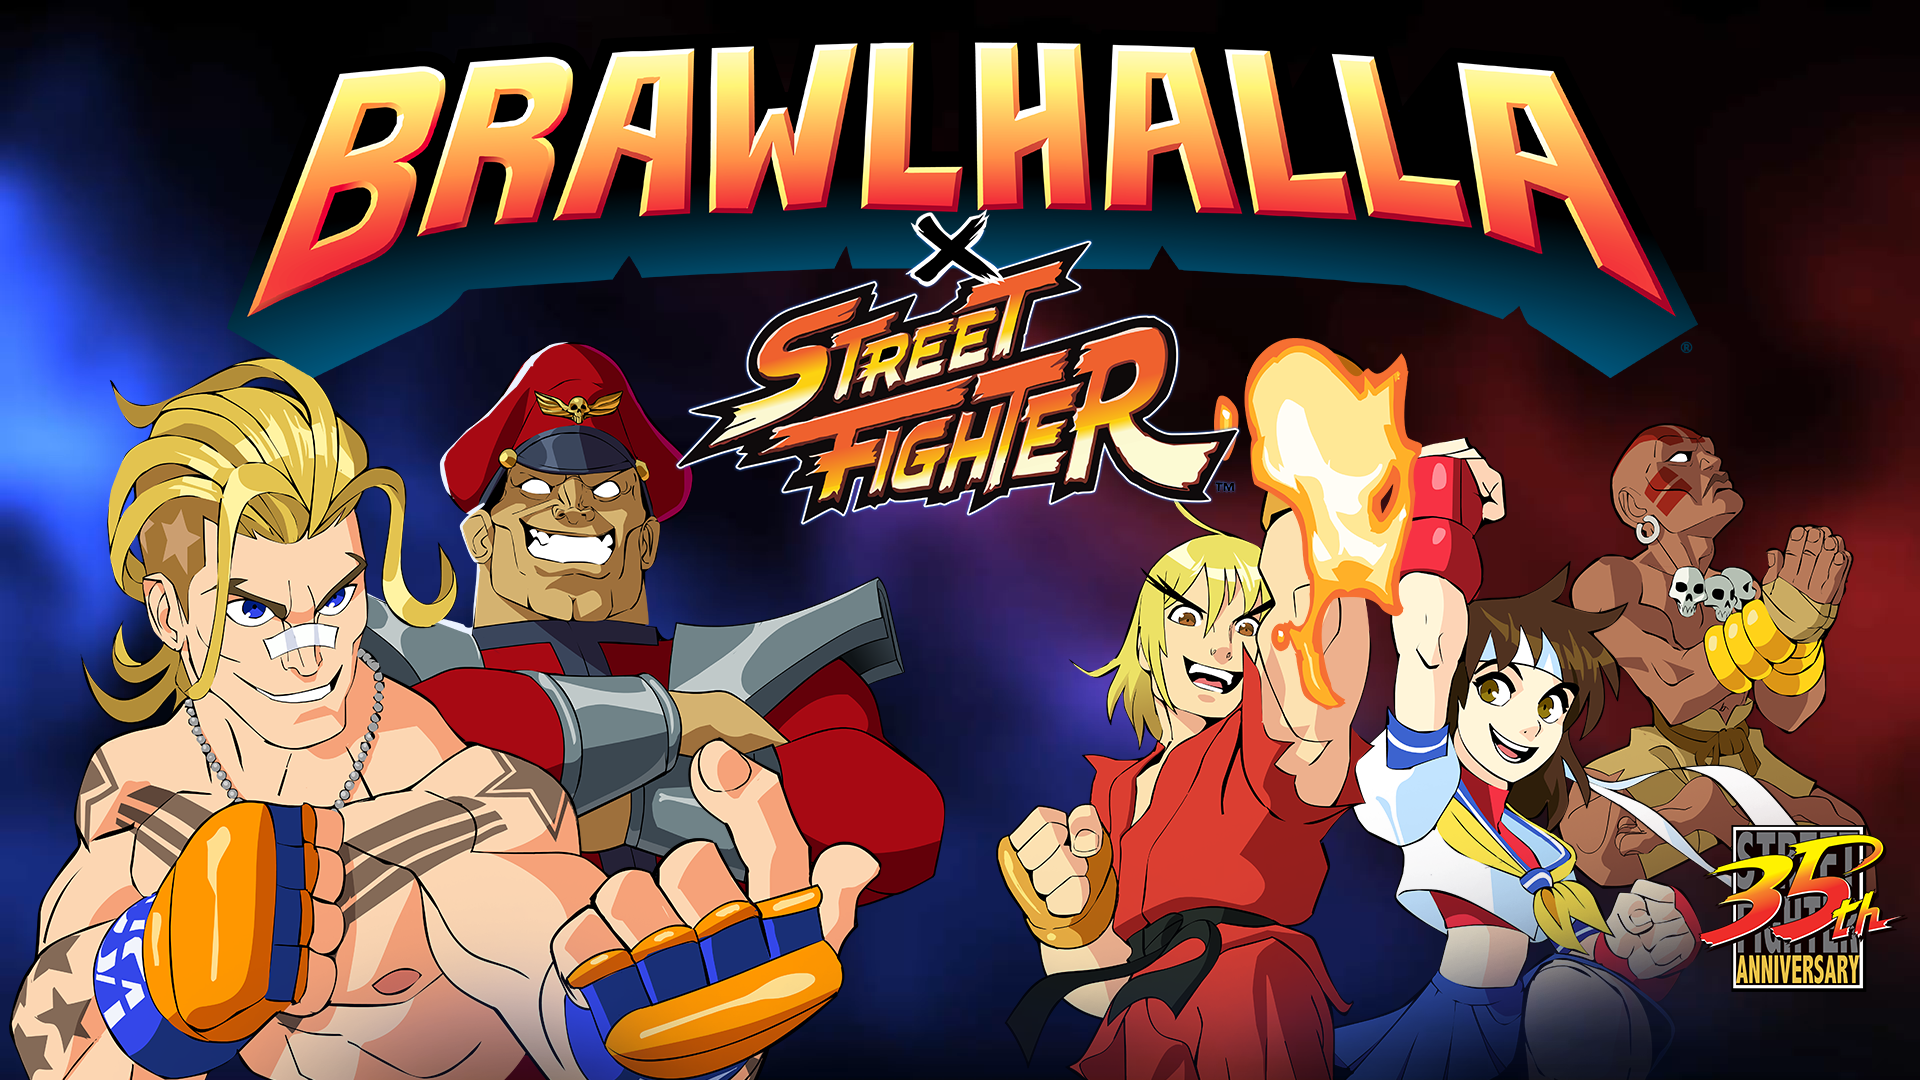 The Fight Continues In Brawlhalla With Street Fighter Part II Epic Crossover